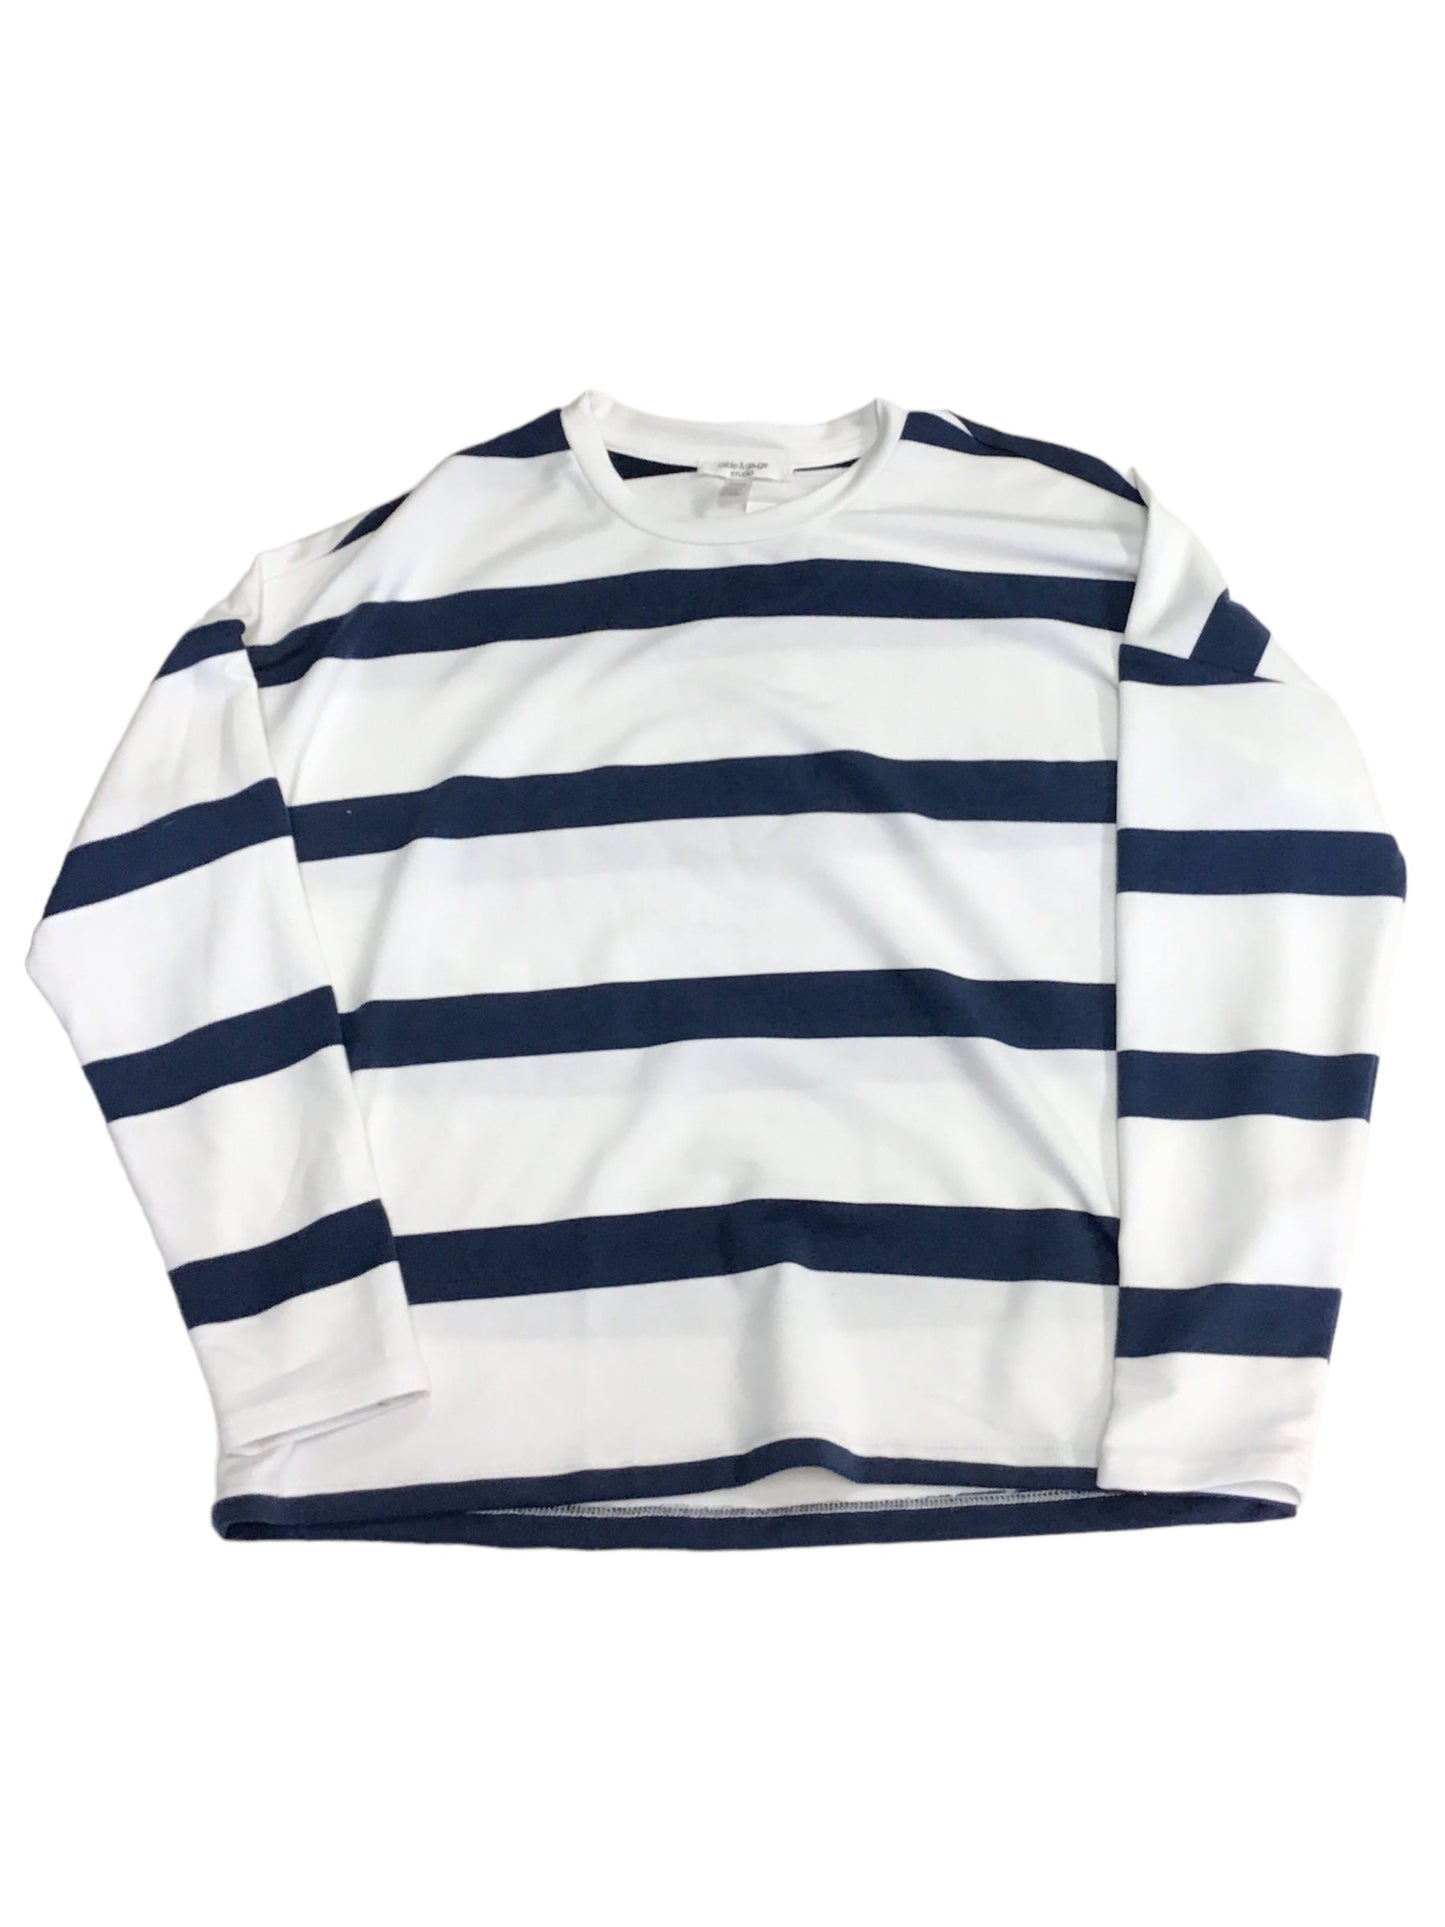 Striped Pattern Sweatshirt Crewneck Cable And Gauge, Size S